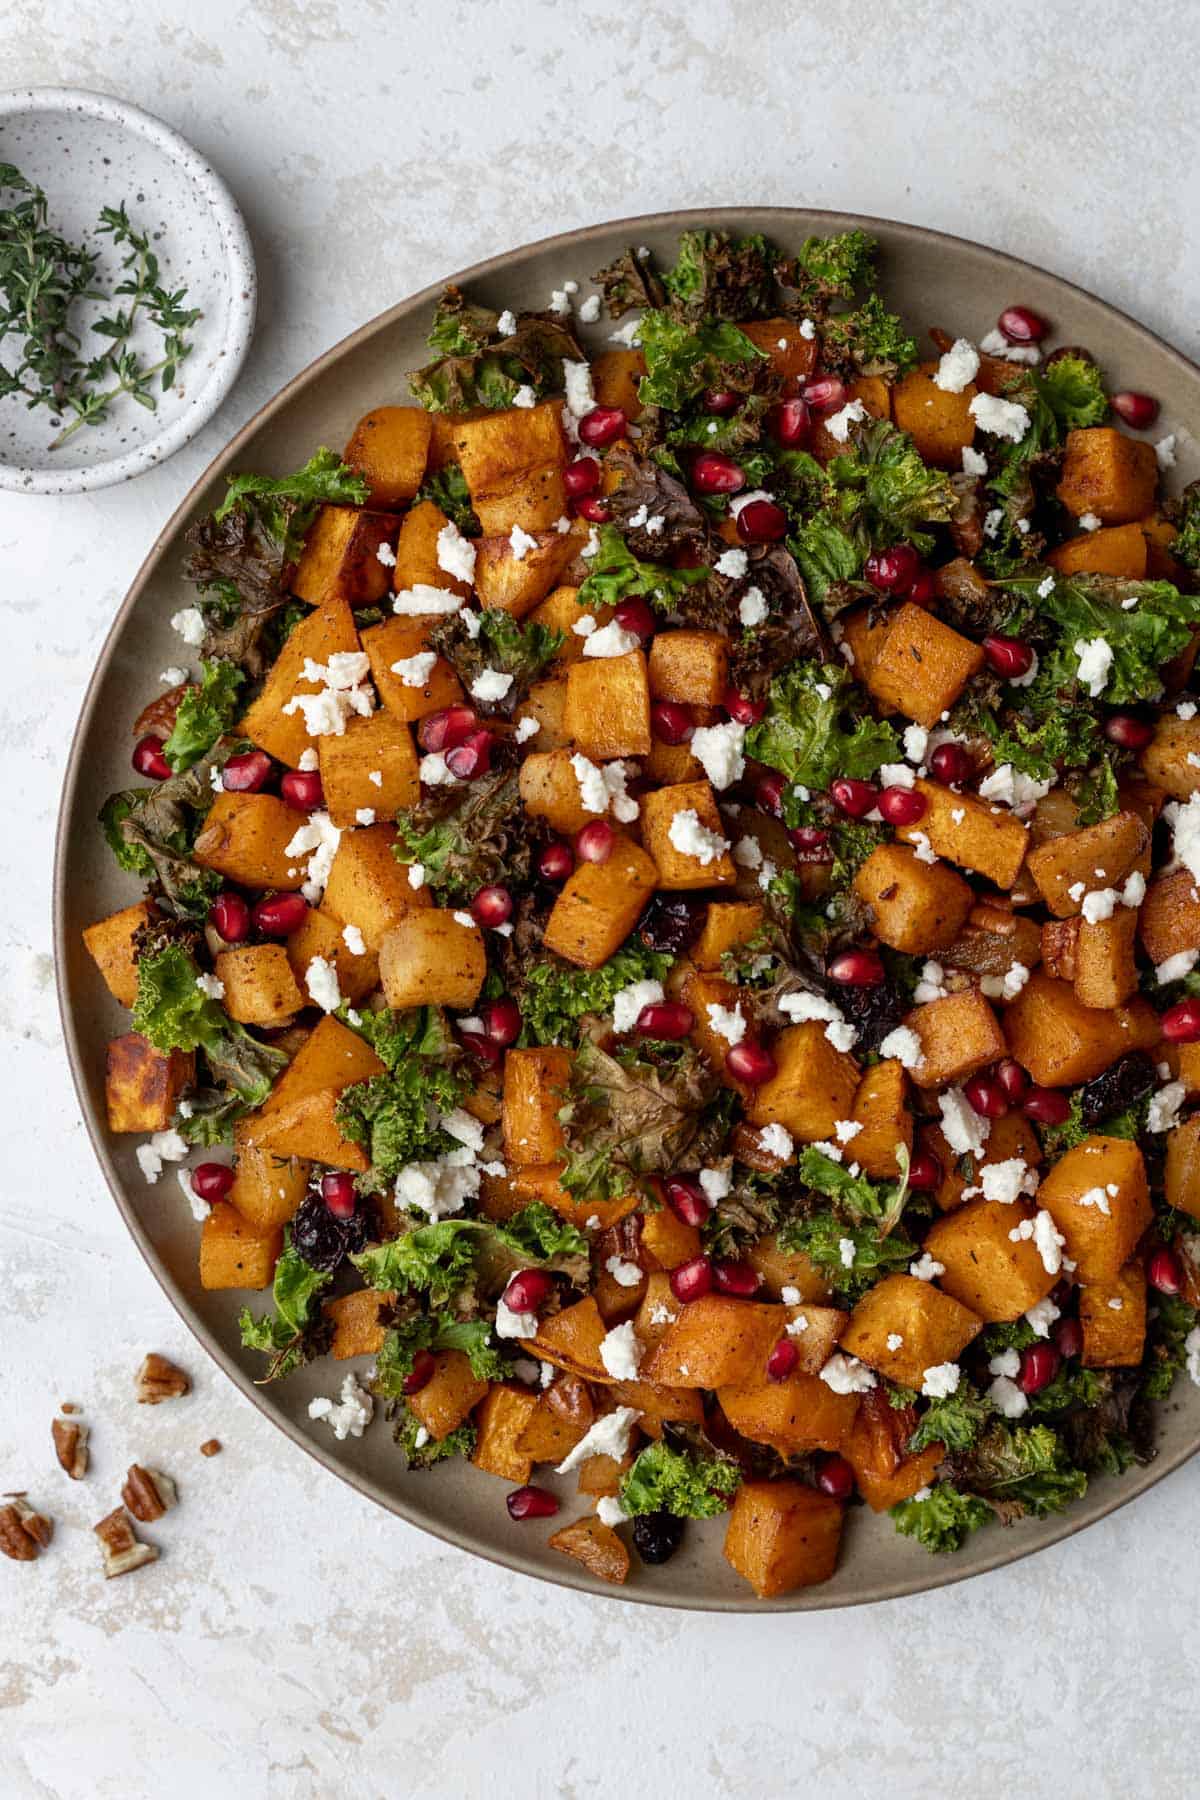 Roasted butternut squash with baked apples and crispy kale in a serving bowl with pomegranate seeds and feta on top.